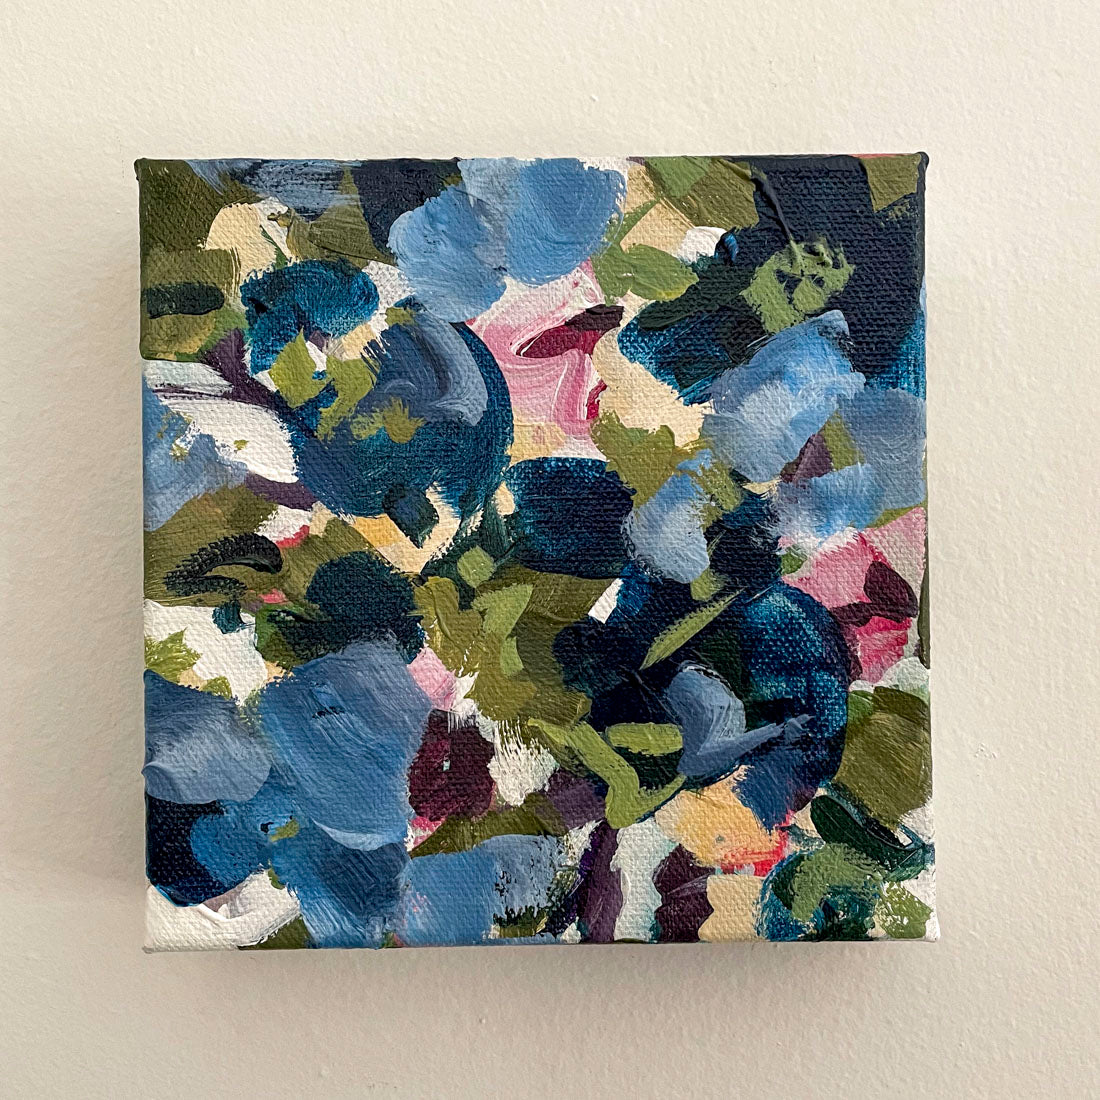 Abstract Floral Blues - Abstract Landscape Painting 6x6in